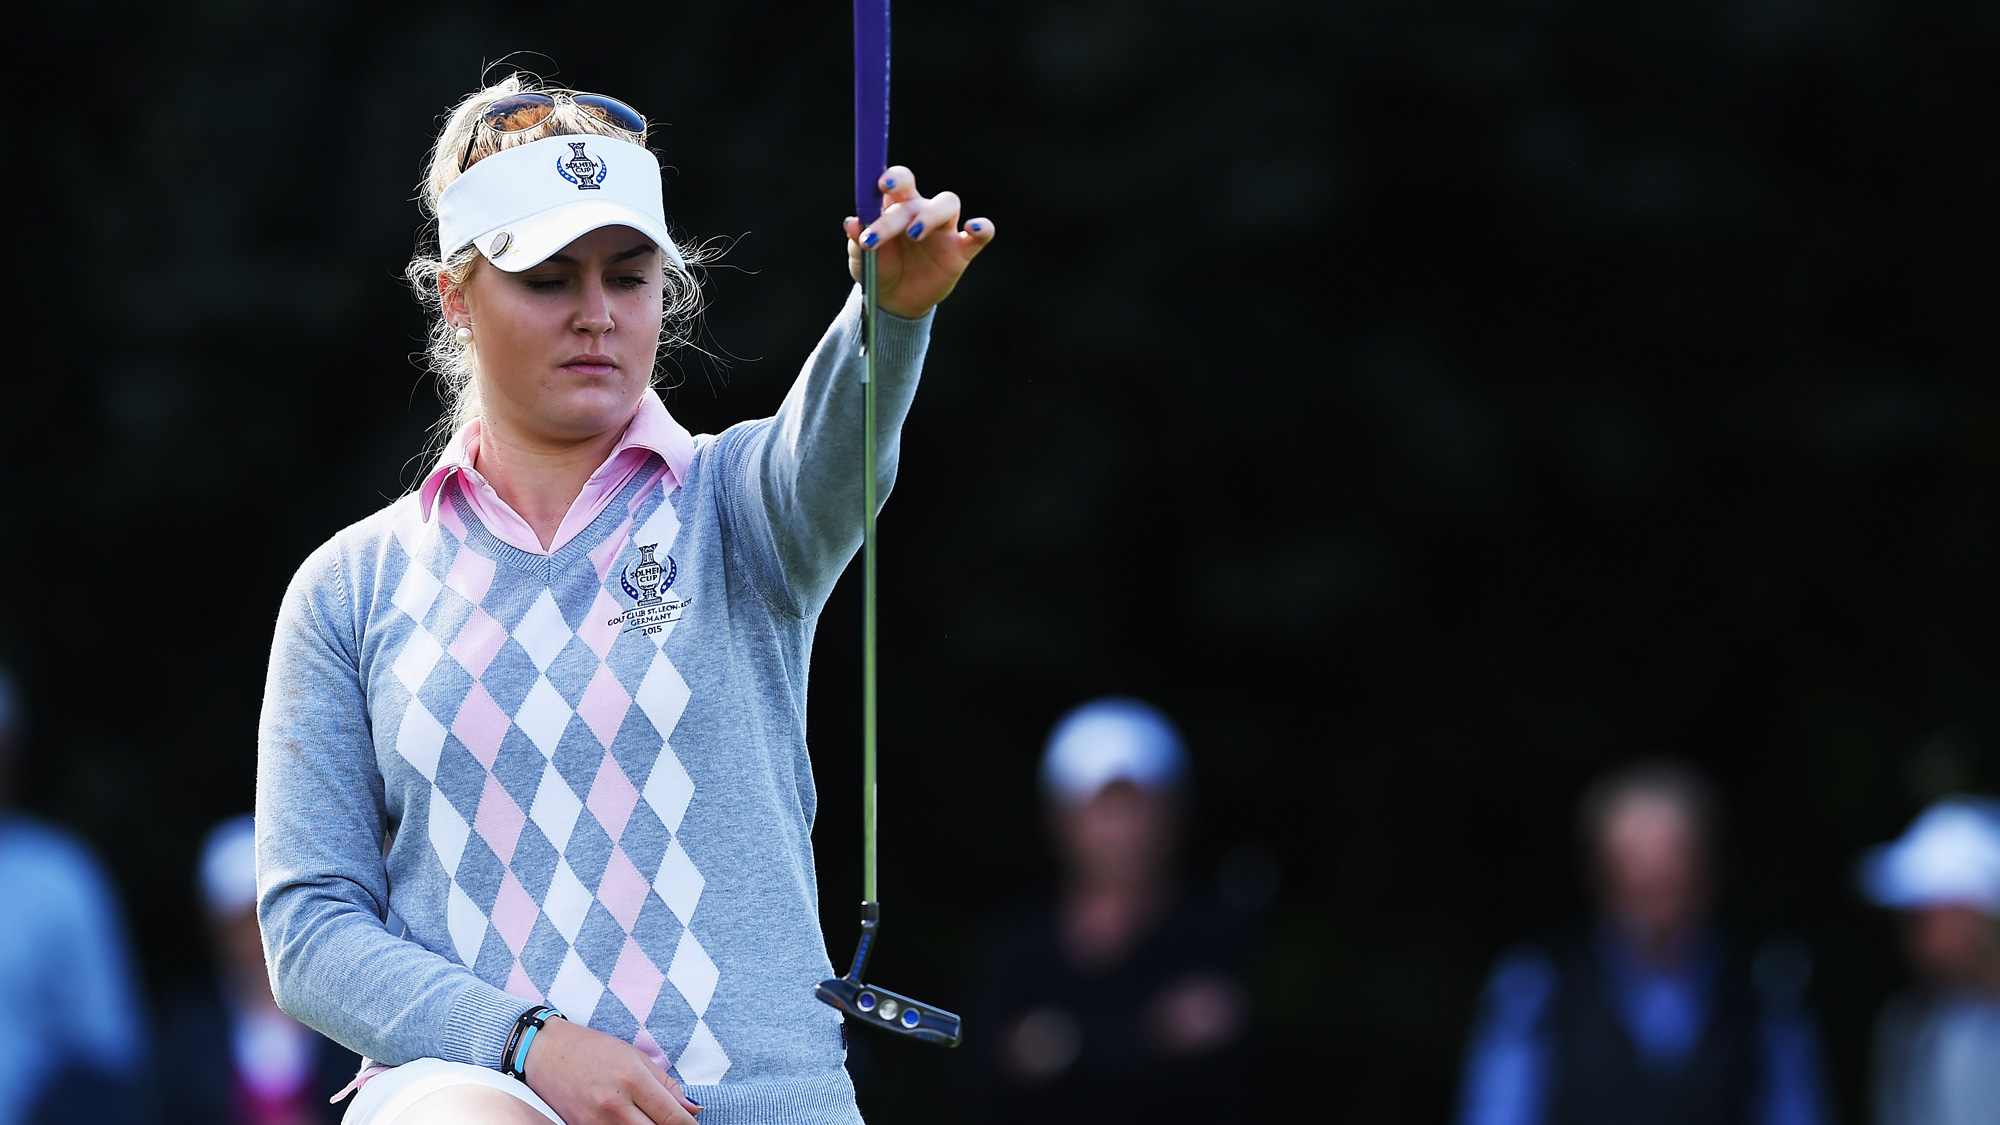 Some top pros still searching for elusive victory | LPGA | Ladies ...